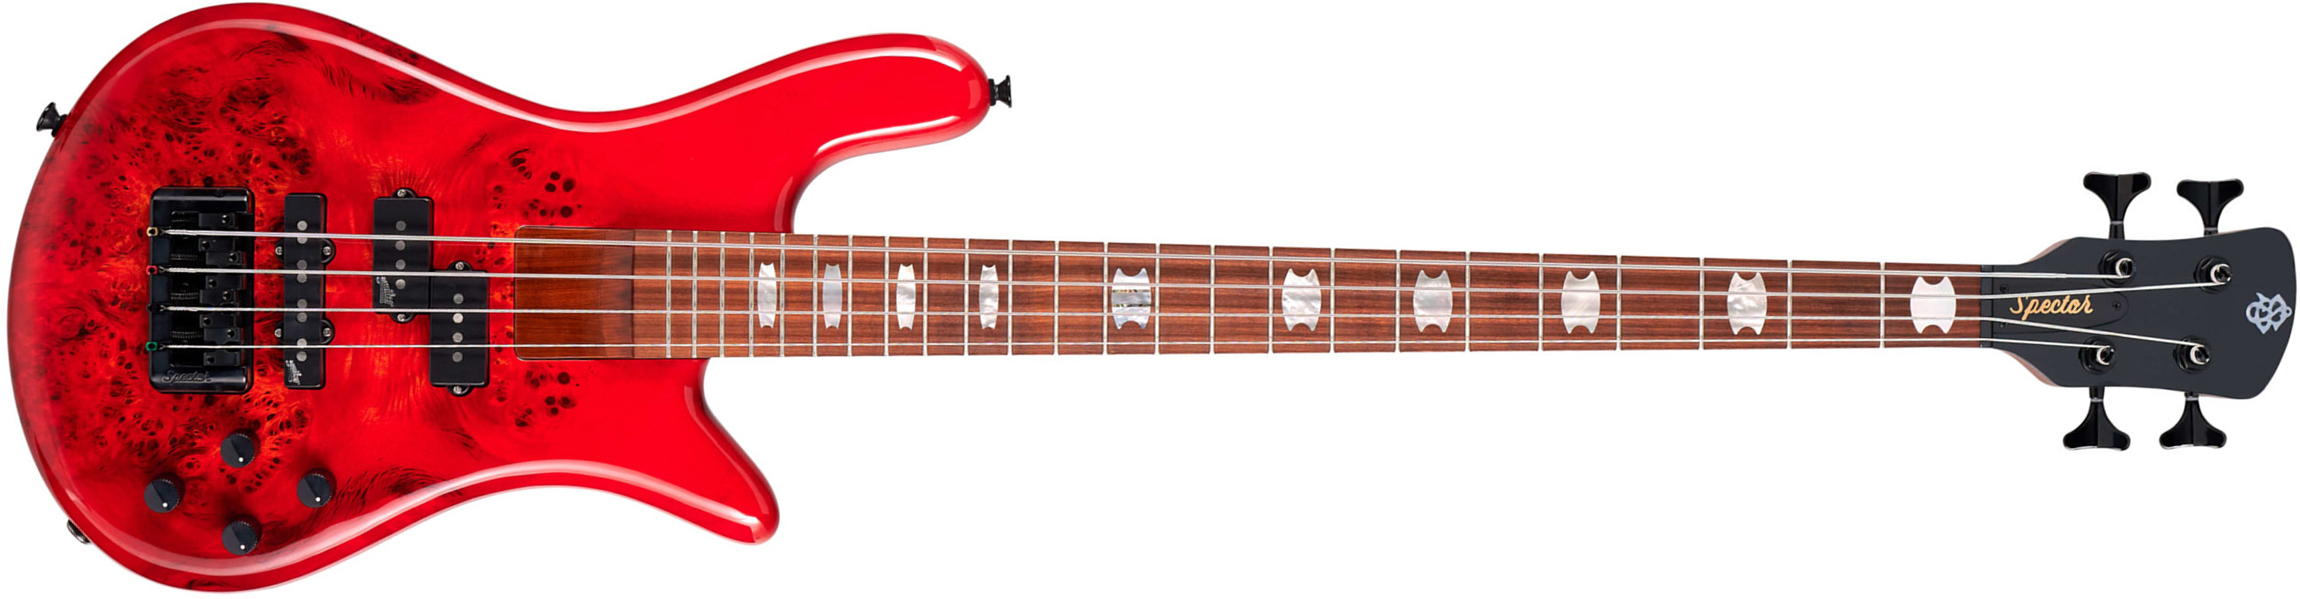 Spector Ns Eurobolt 4c Active Aguilar Mn - Inferno Red - Solid body electric bass - Main picture